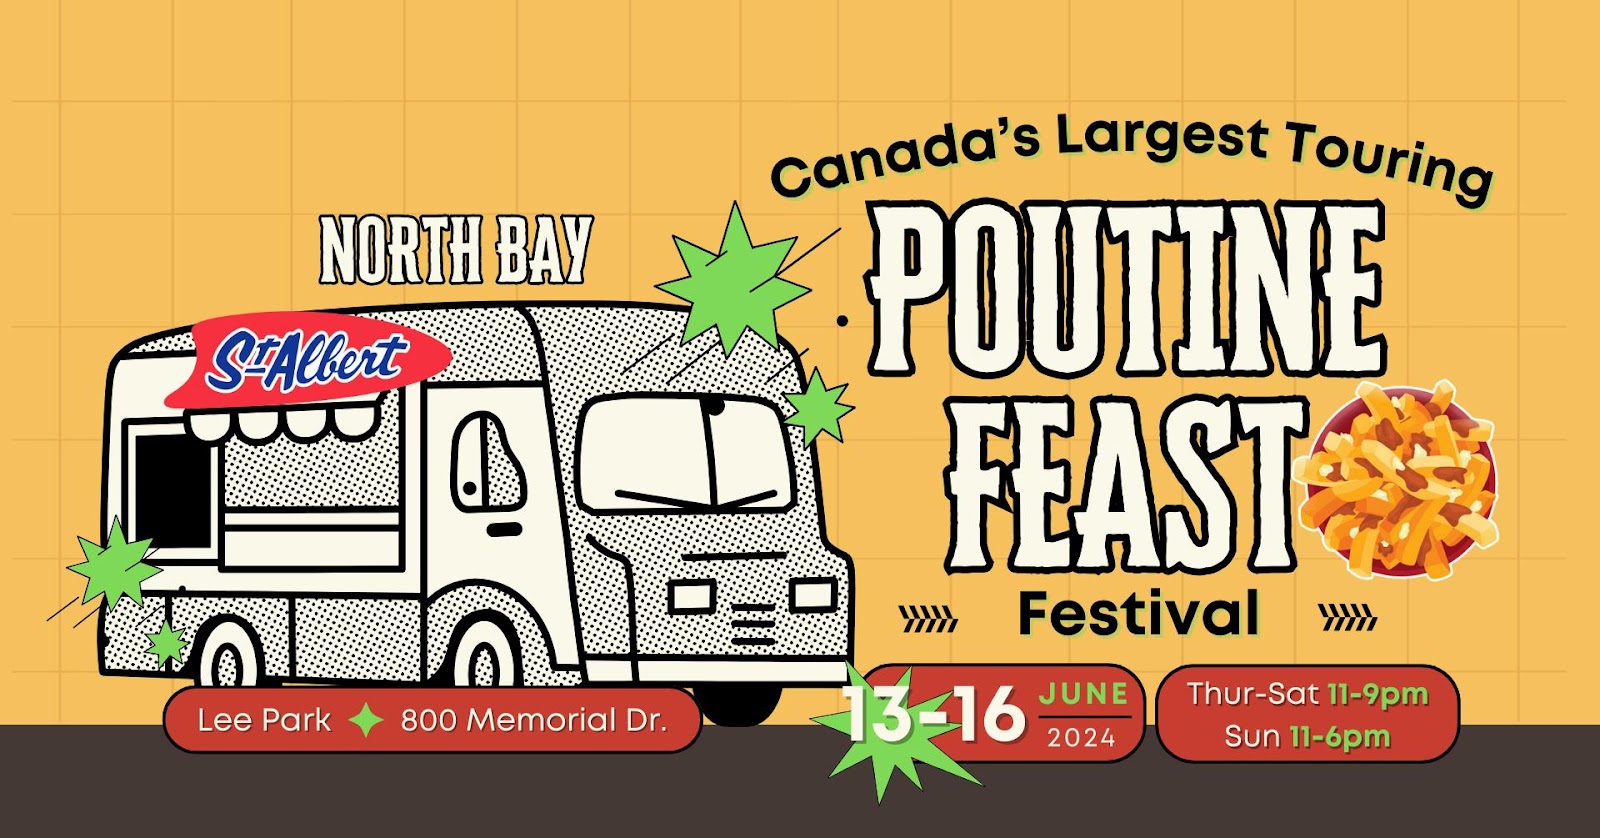 an ad featuring a cartoon line drawing of a shiny food truck and text that reads "Canada's Largest Touring Poutine Feast Festival 2024, North Bay June 13 to 16 Thursday to Saturday 11 to 9 PM, Sunday 11 to 6 PM, Lee Park, 800 Memorial Drive".